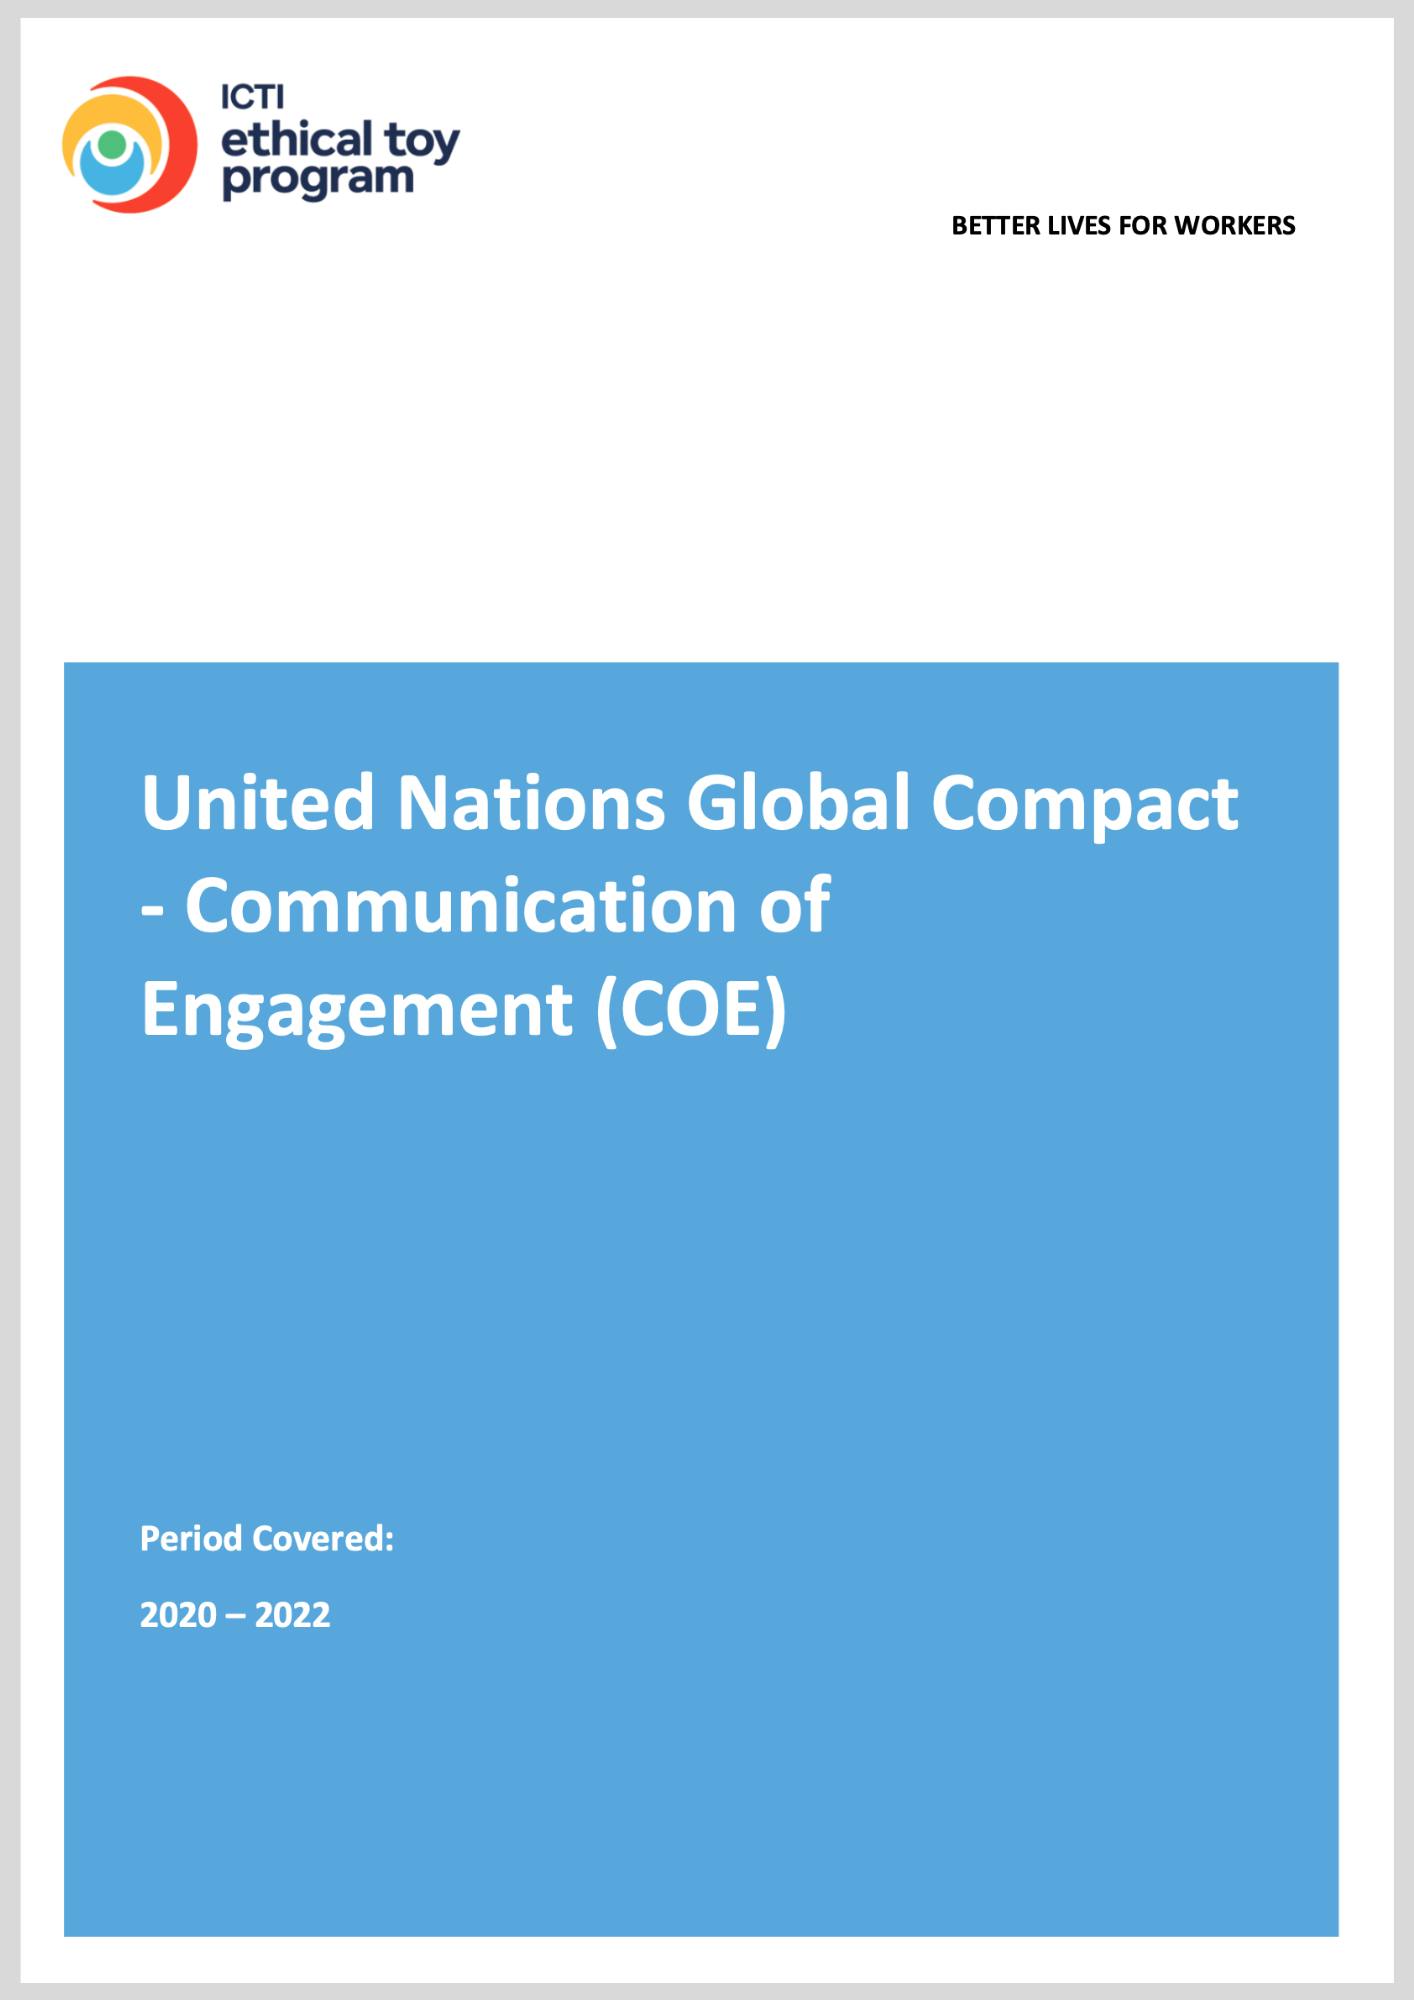 United Nations Global Compact - Communication of Engagement (COE)